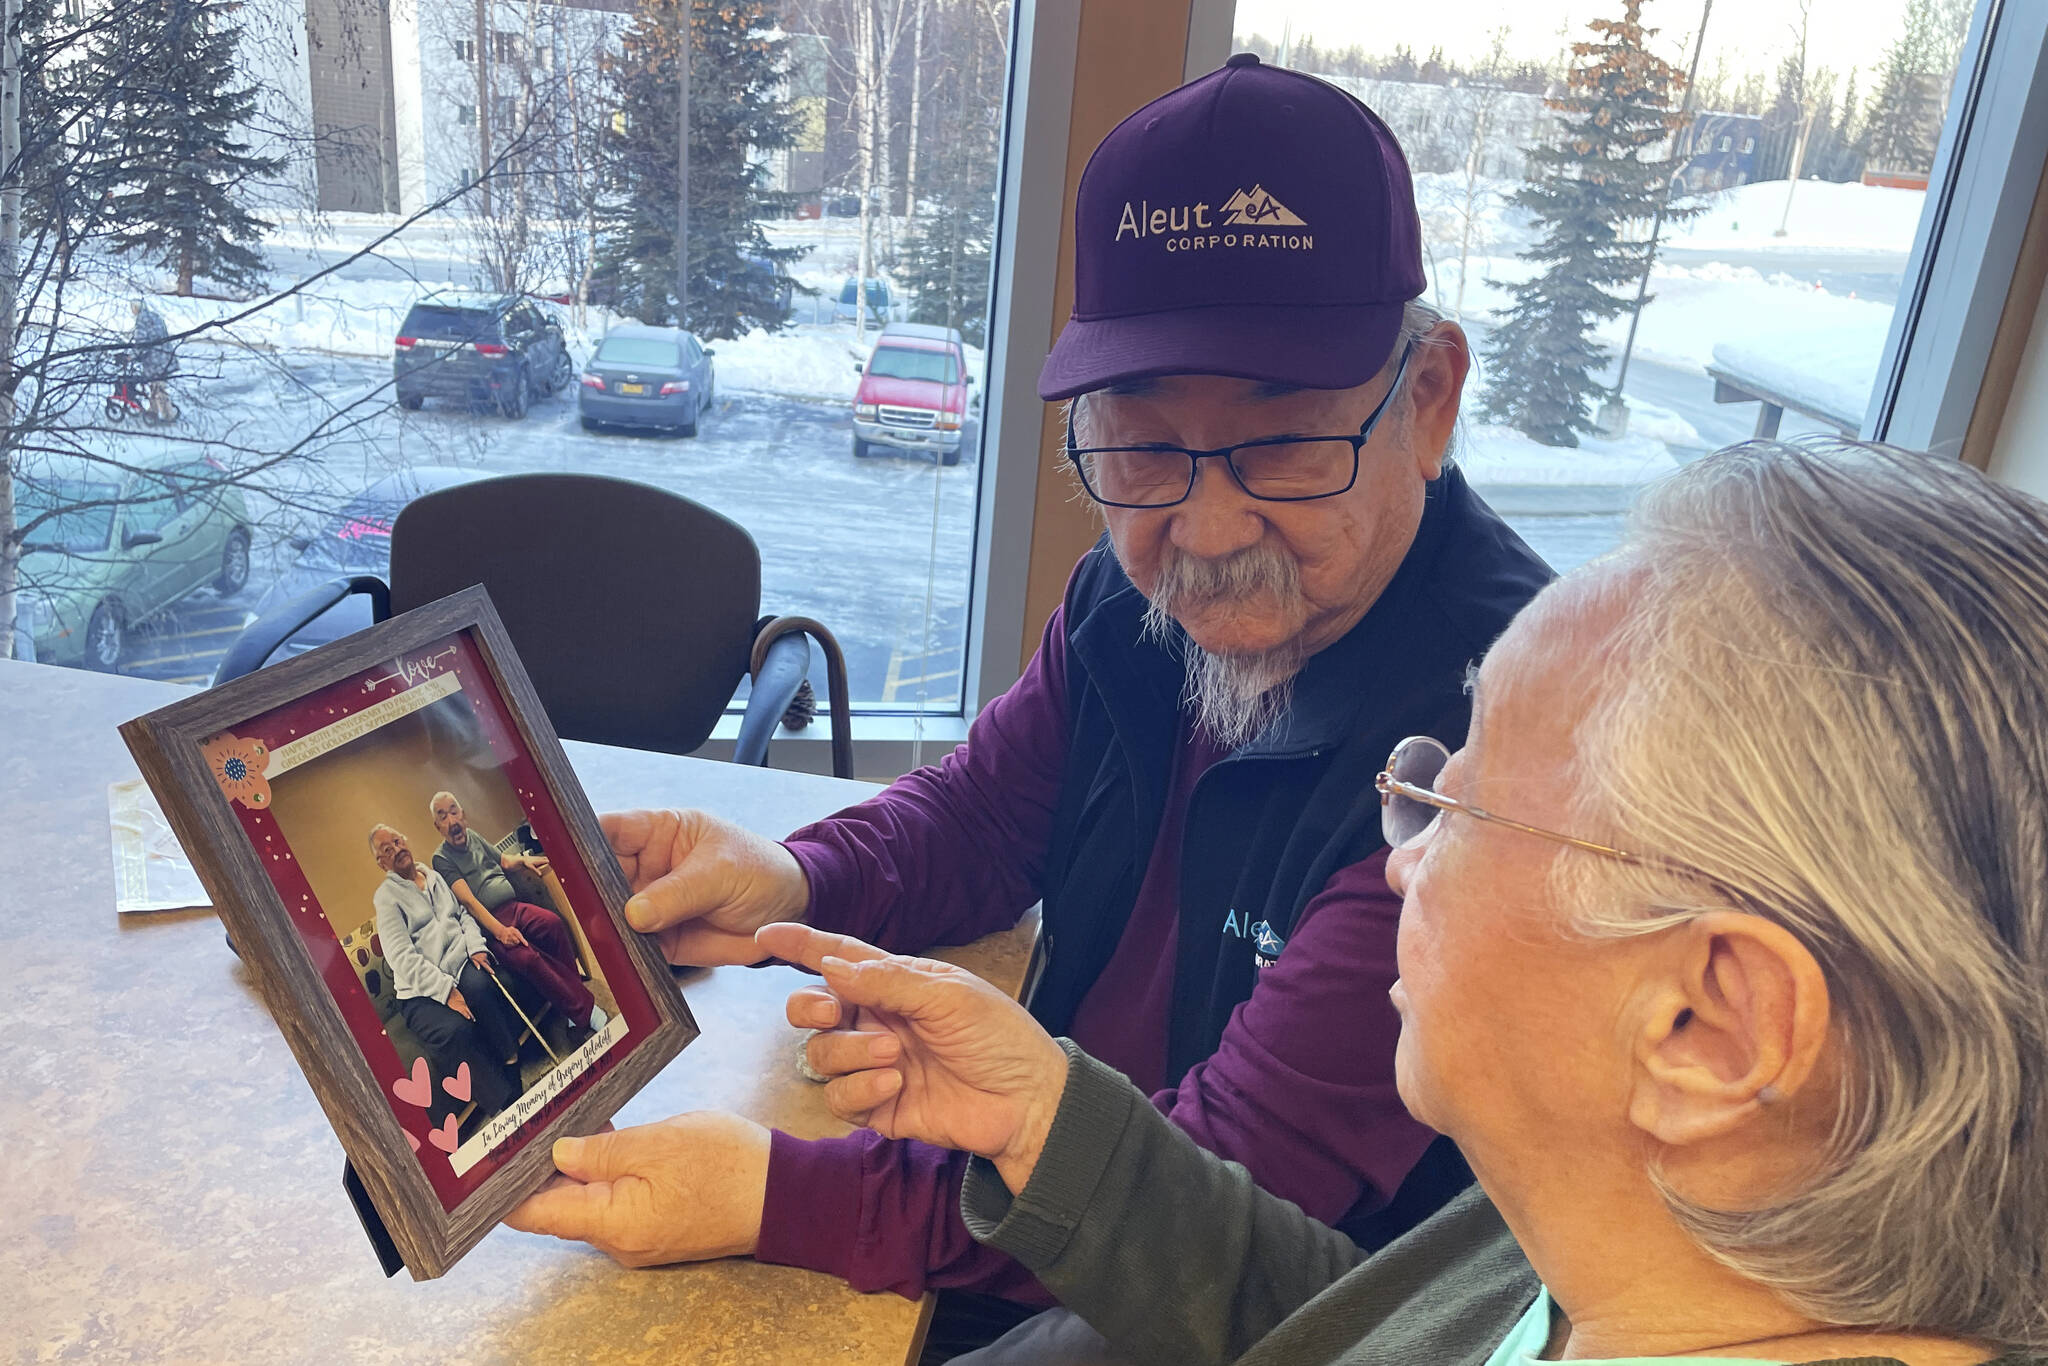 George Kudrin, left, and Pauline Golodoff hold a photo of Pauline and her late husband, Gregory Golodoff, Friday, Dec. 1, 2023, in Anchorage, Alaska. Gregory and his sister Elizabeth Golodoff Kudrin, George’s late wife, were the last two living residents of Attu, Alaska, whose entire population was captured by the Japanese during World War II and sent to Japan until being liberated after the war. The community of Attu was not rebuilt, and residents were resettled elsewhere, mostly in Atka, Alaska. (AP Photo/Mark Thiessen)